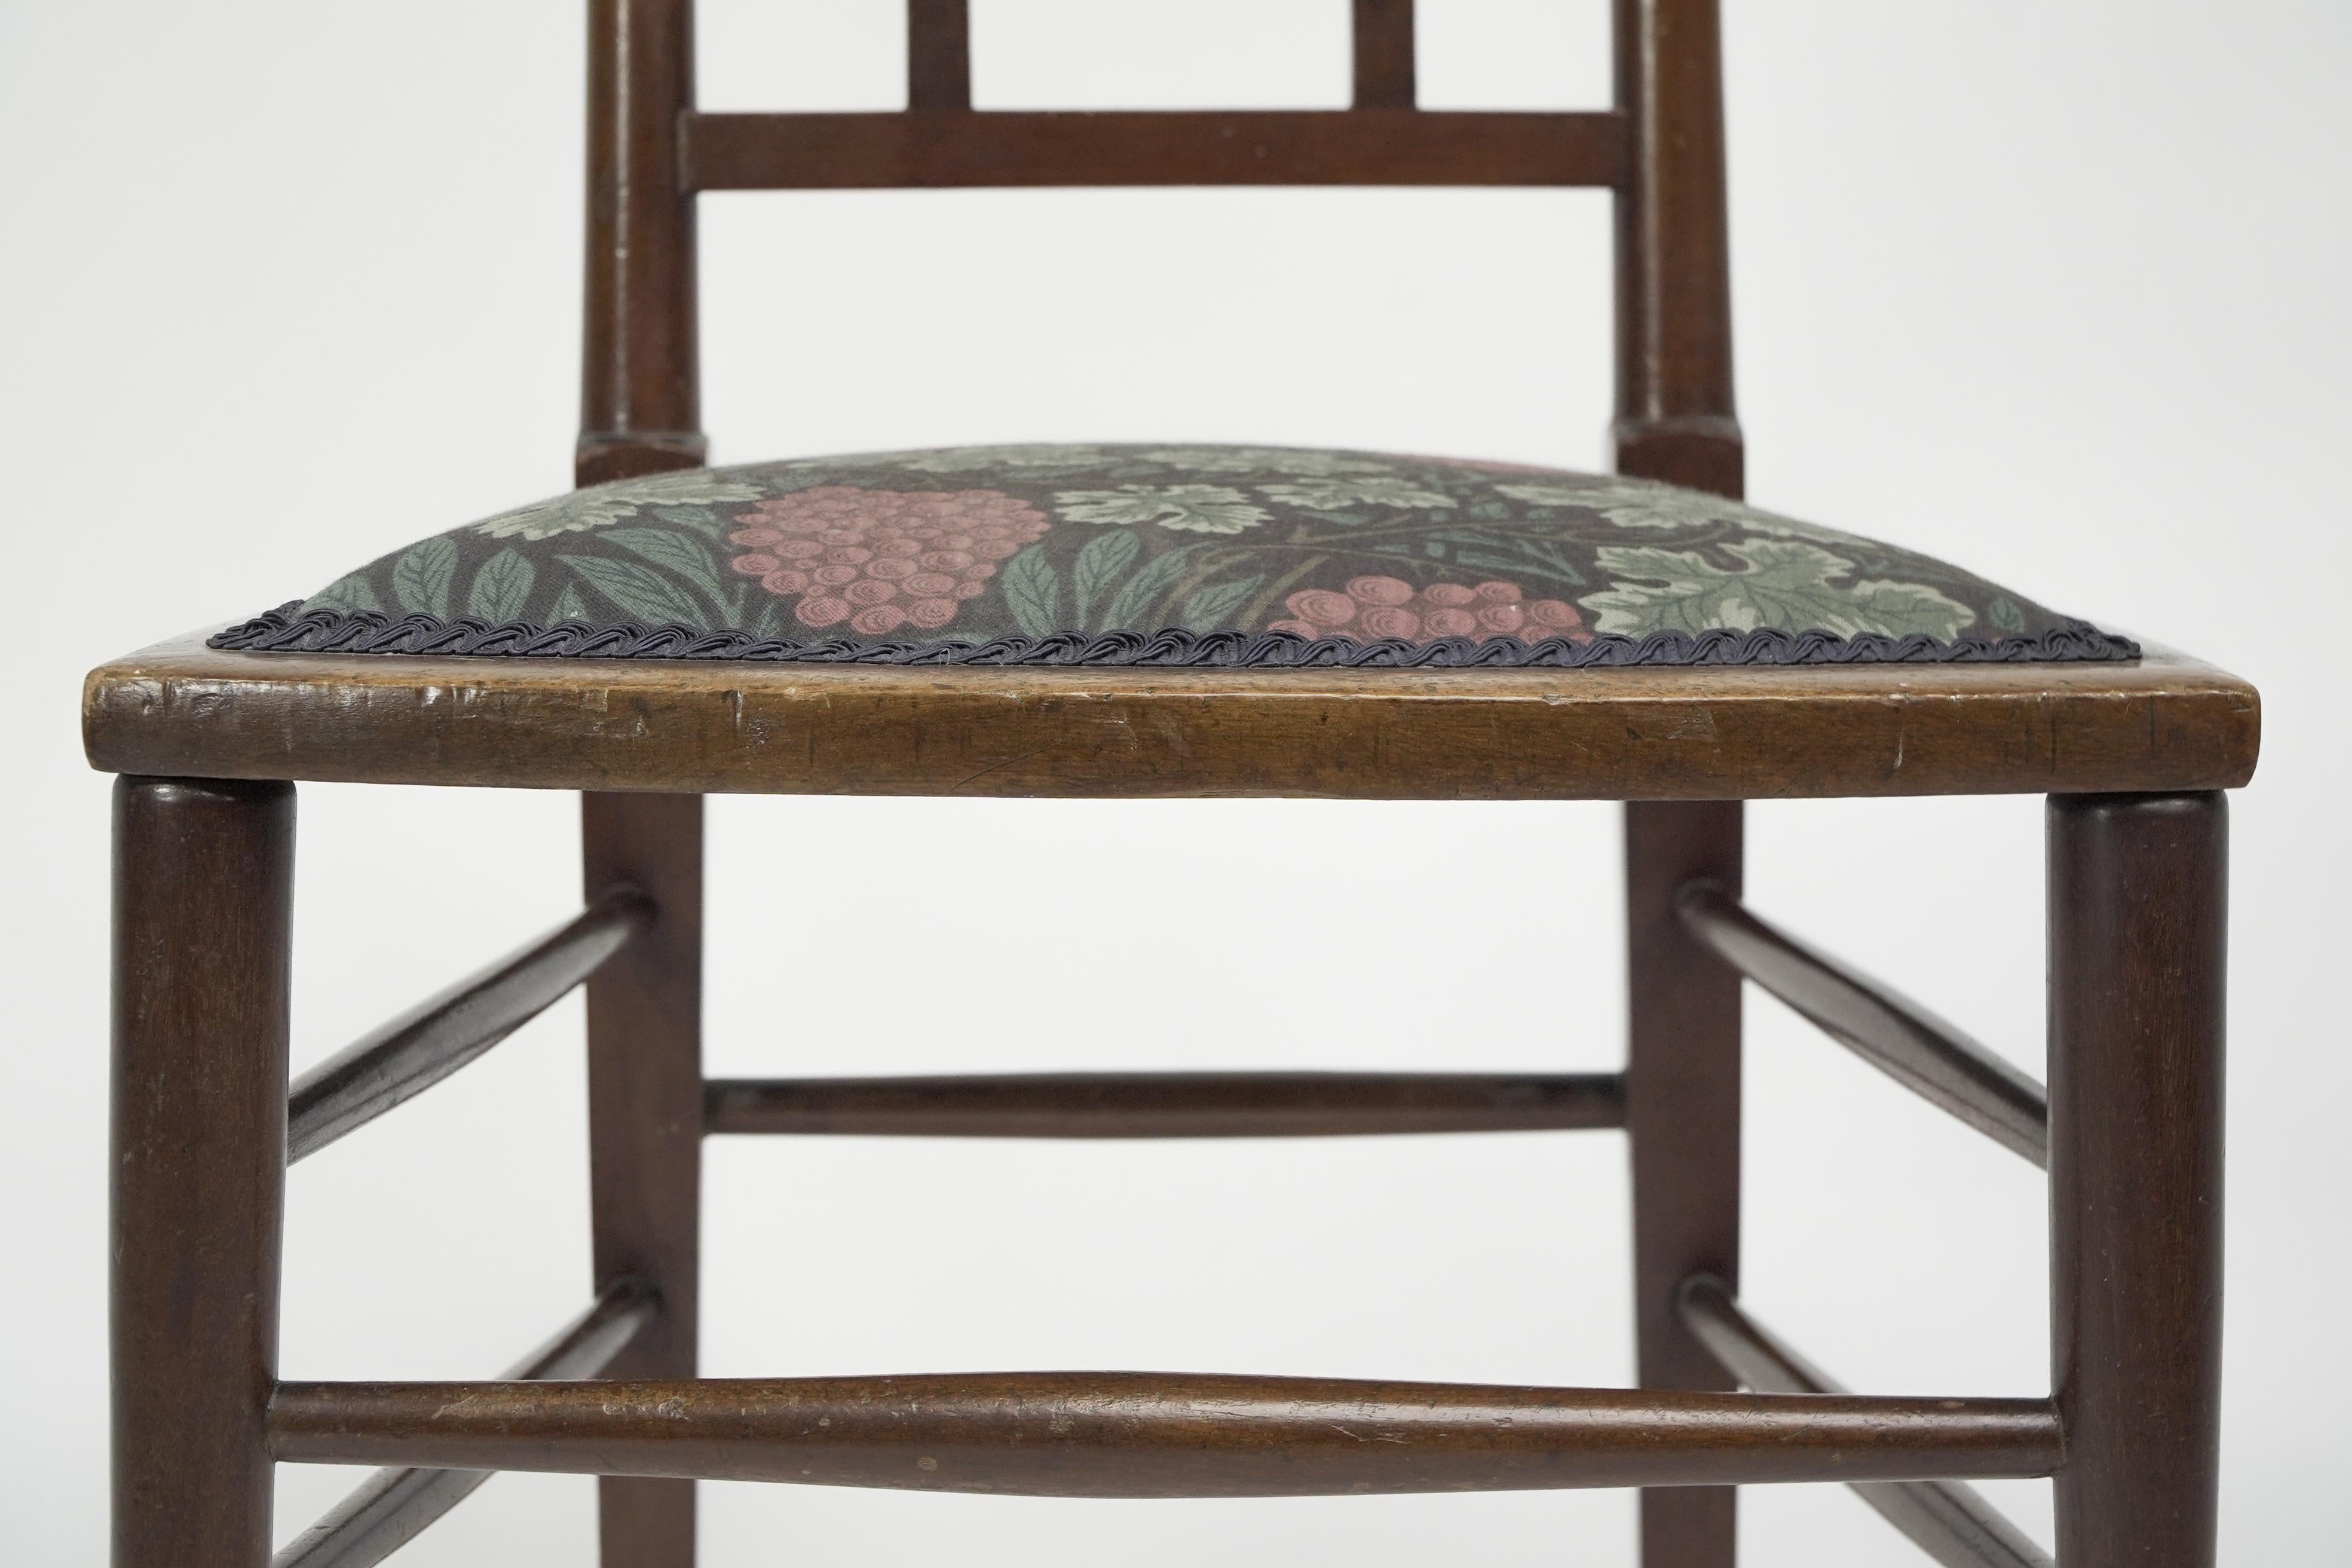 E G Punnett for Liberty & Co. A Walnut side chair with inlaid floral decoration. For Sale 5